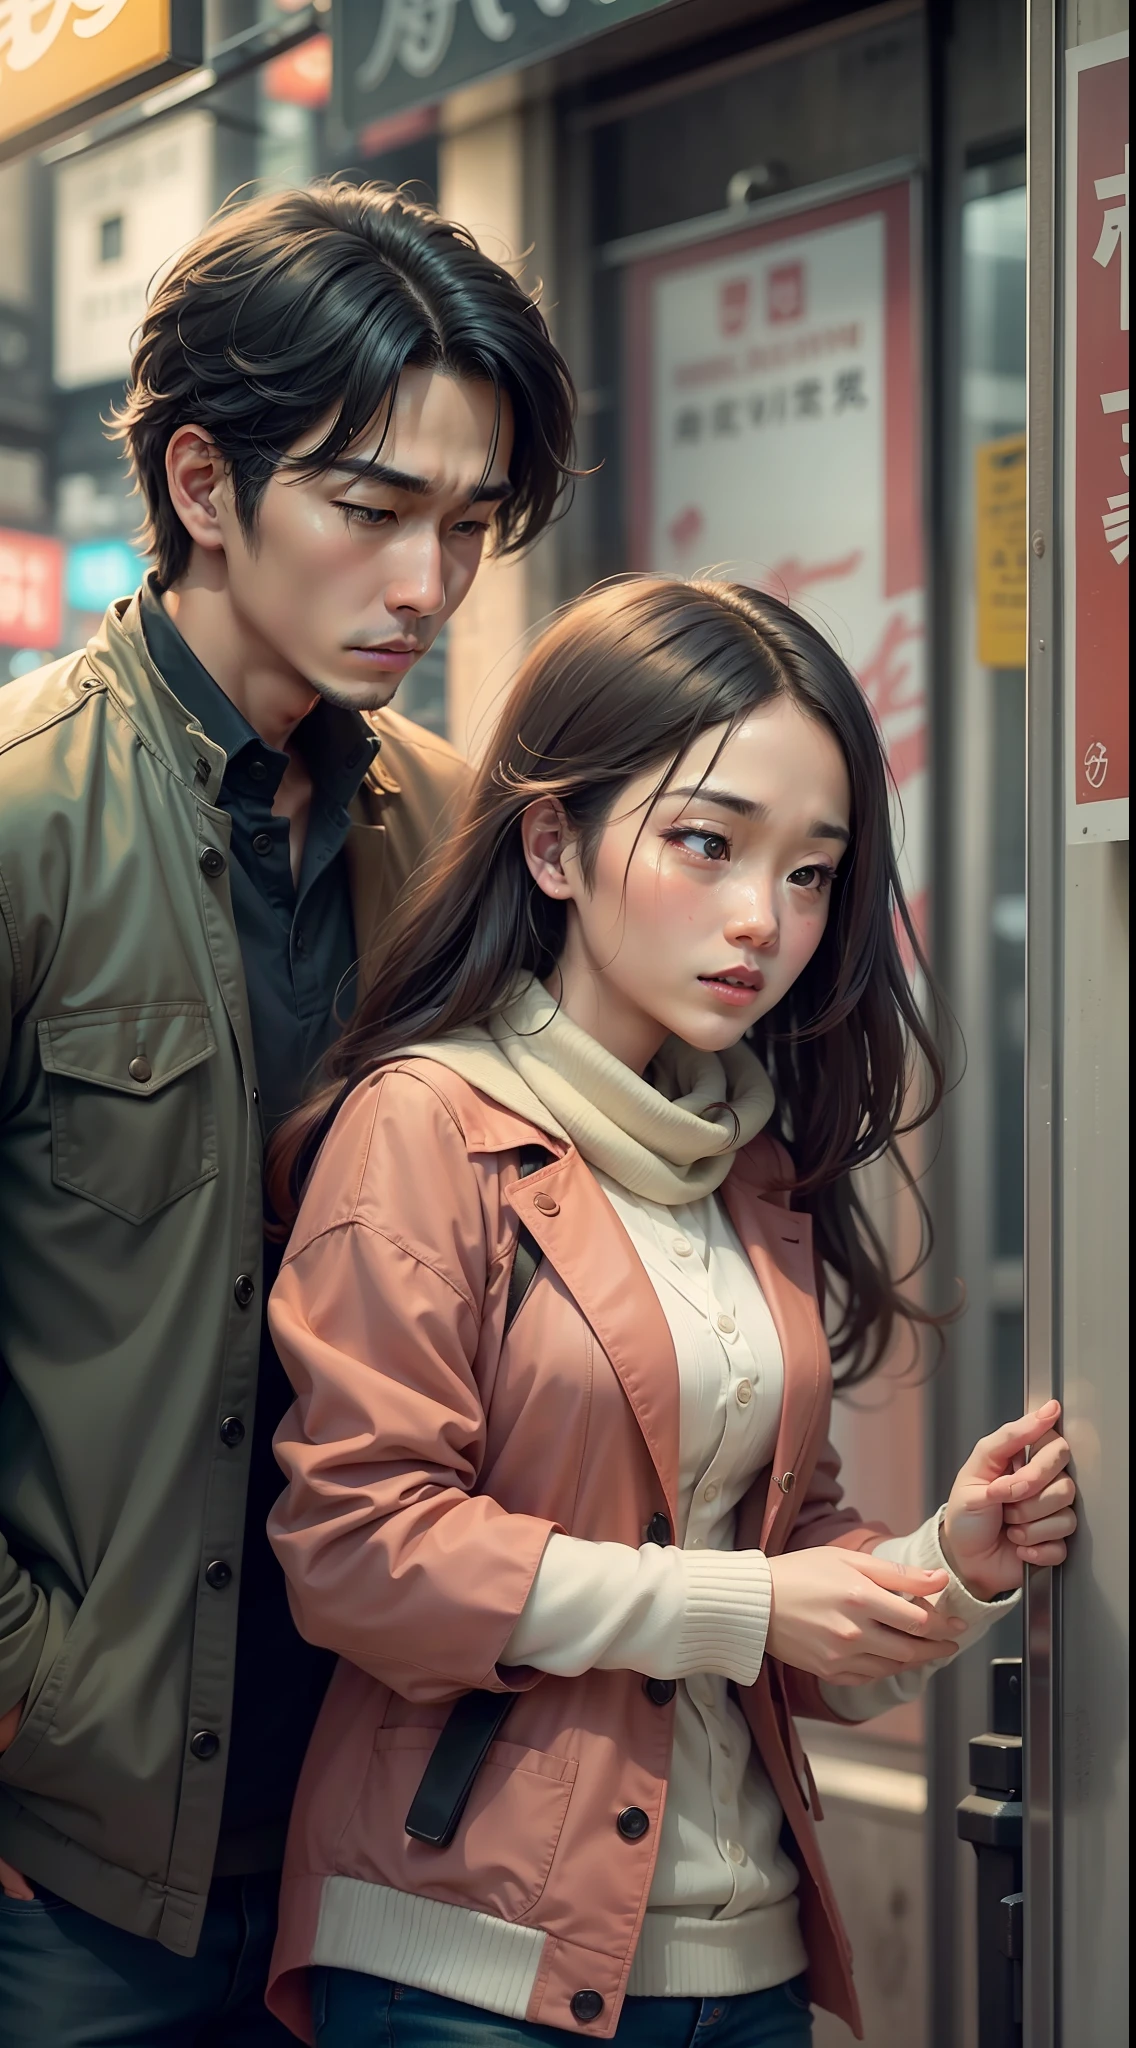 Touching moments, deep emotions, soulful characters, artistic cinematography, vibrant city life, fascinating dialogue, complex love stories in Taiwanese love movies.